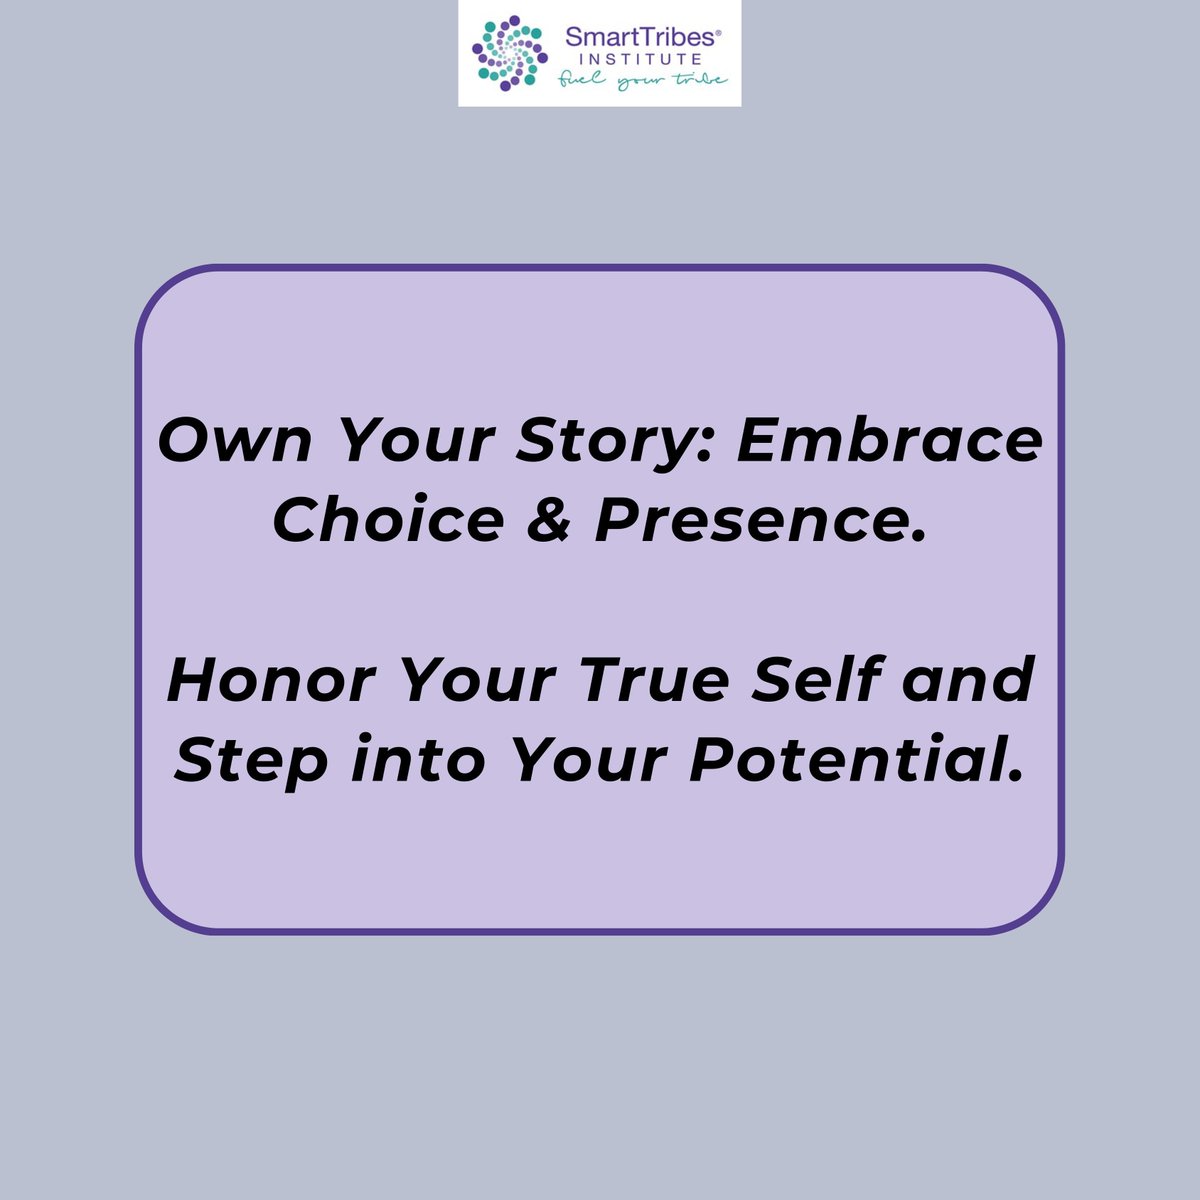 Embrace choice and presence, honor your true self, and step into your potential. Your story is yours to own, filled with moments of empowerment and growth. Say YES to yourself! Click here to explore our weekly reflection: buff.ly/3U86hMs